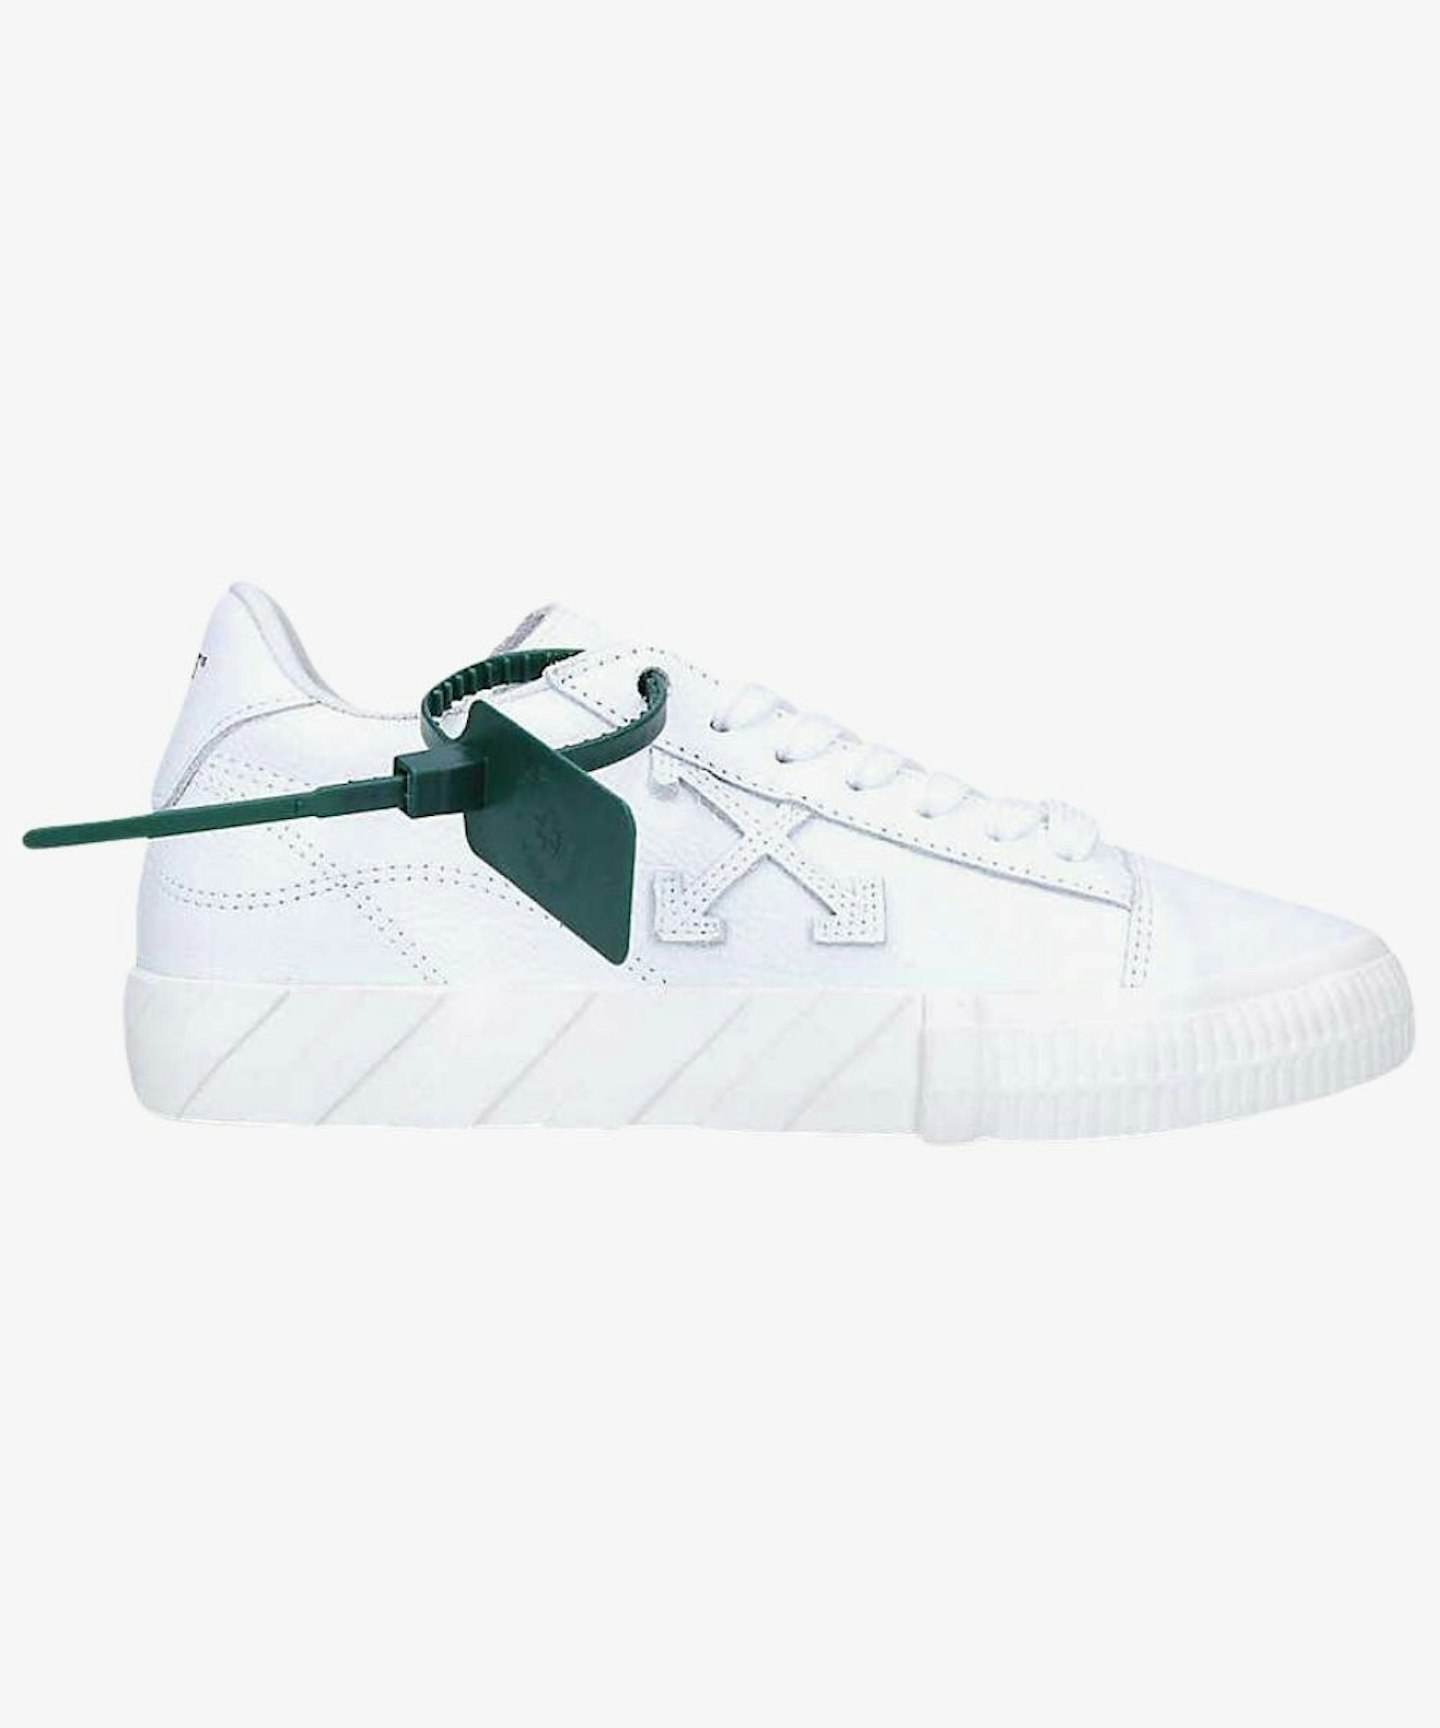 OFF-WHITE Vulcanized Leather Trainers, £355